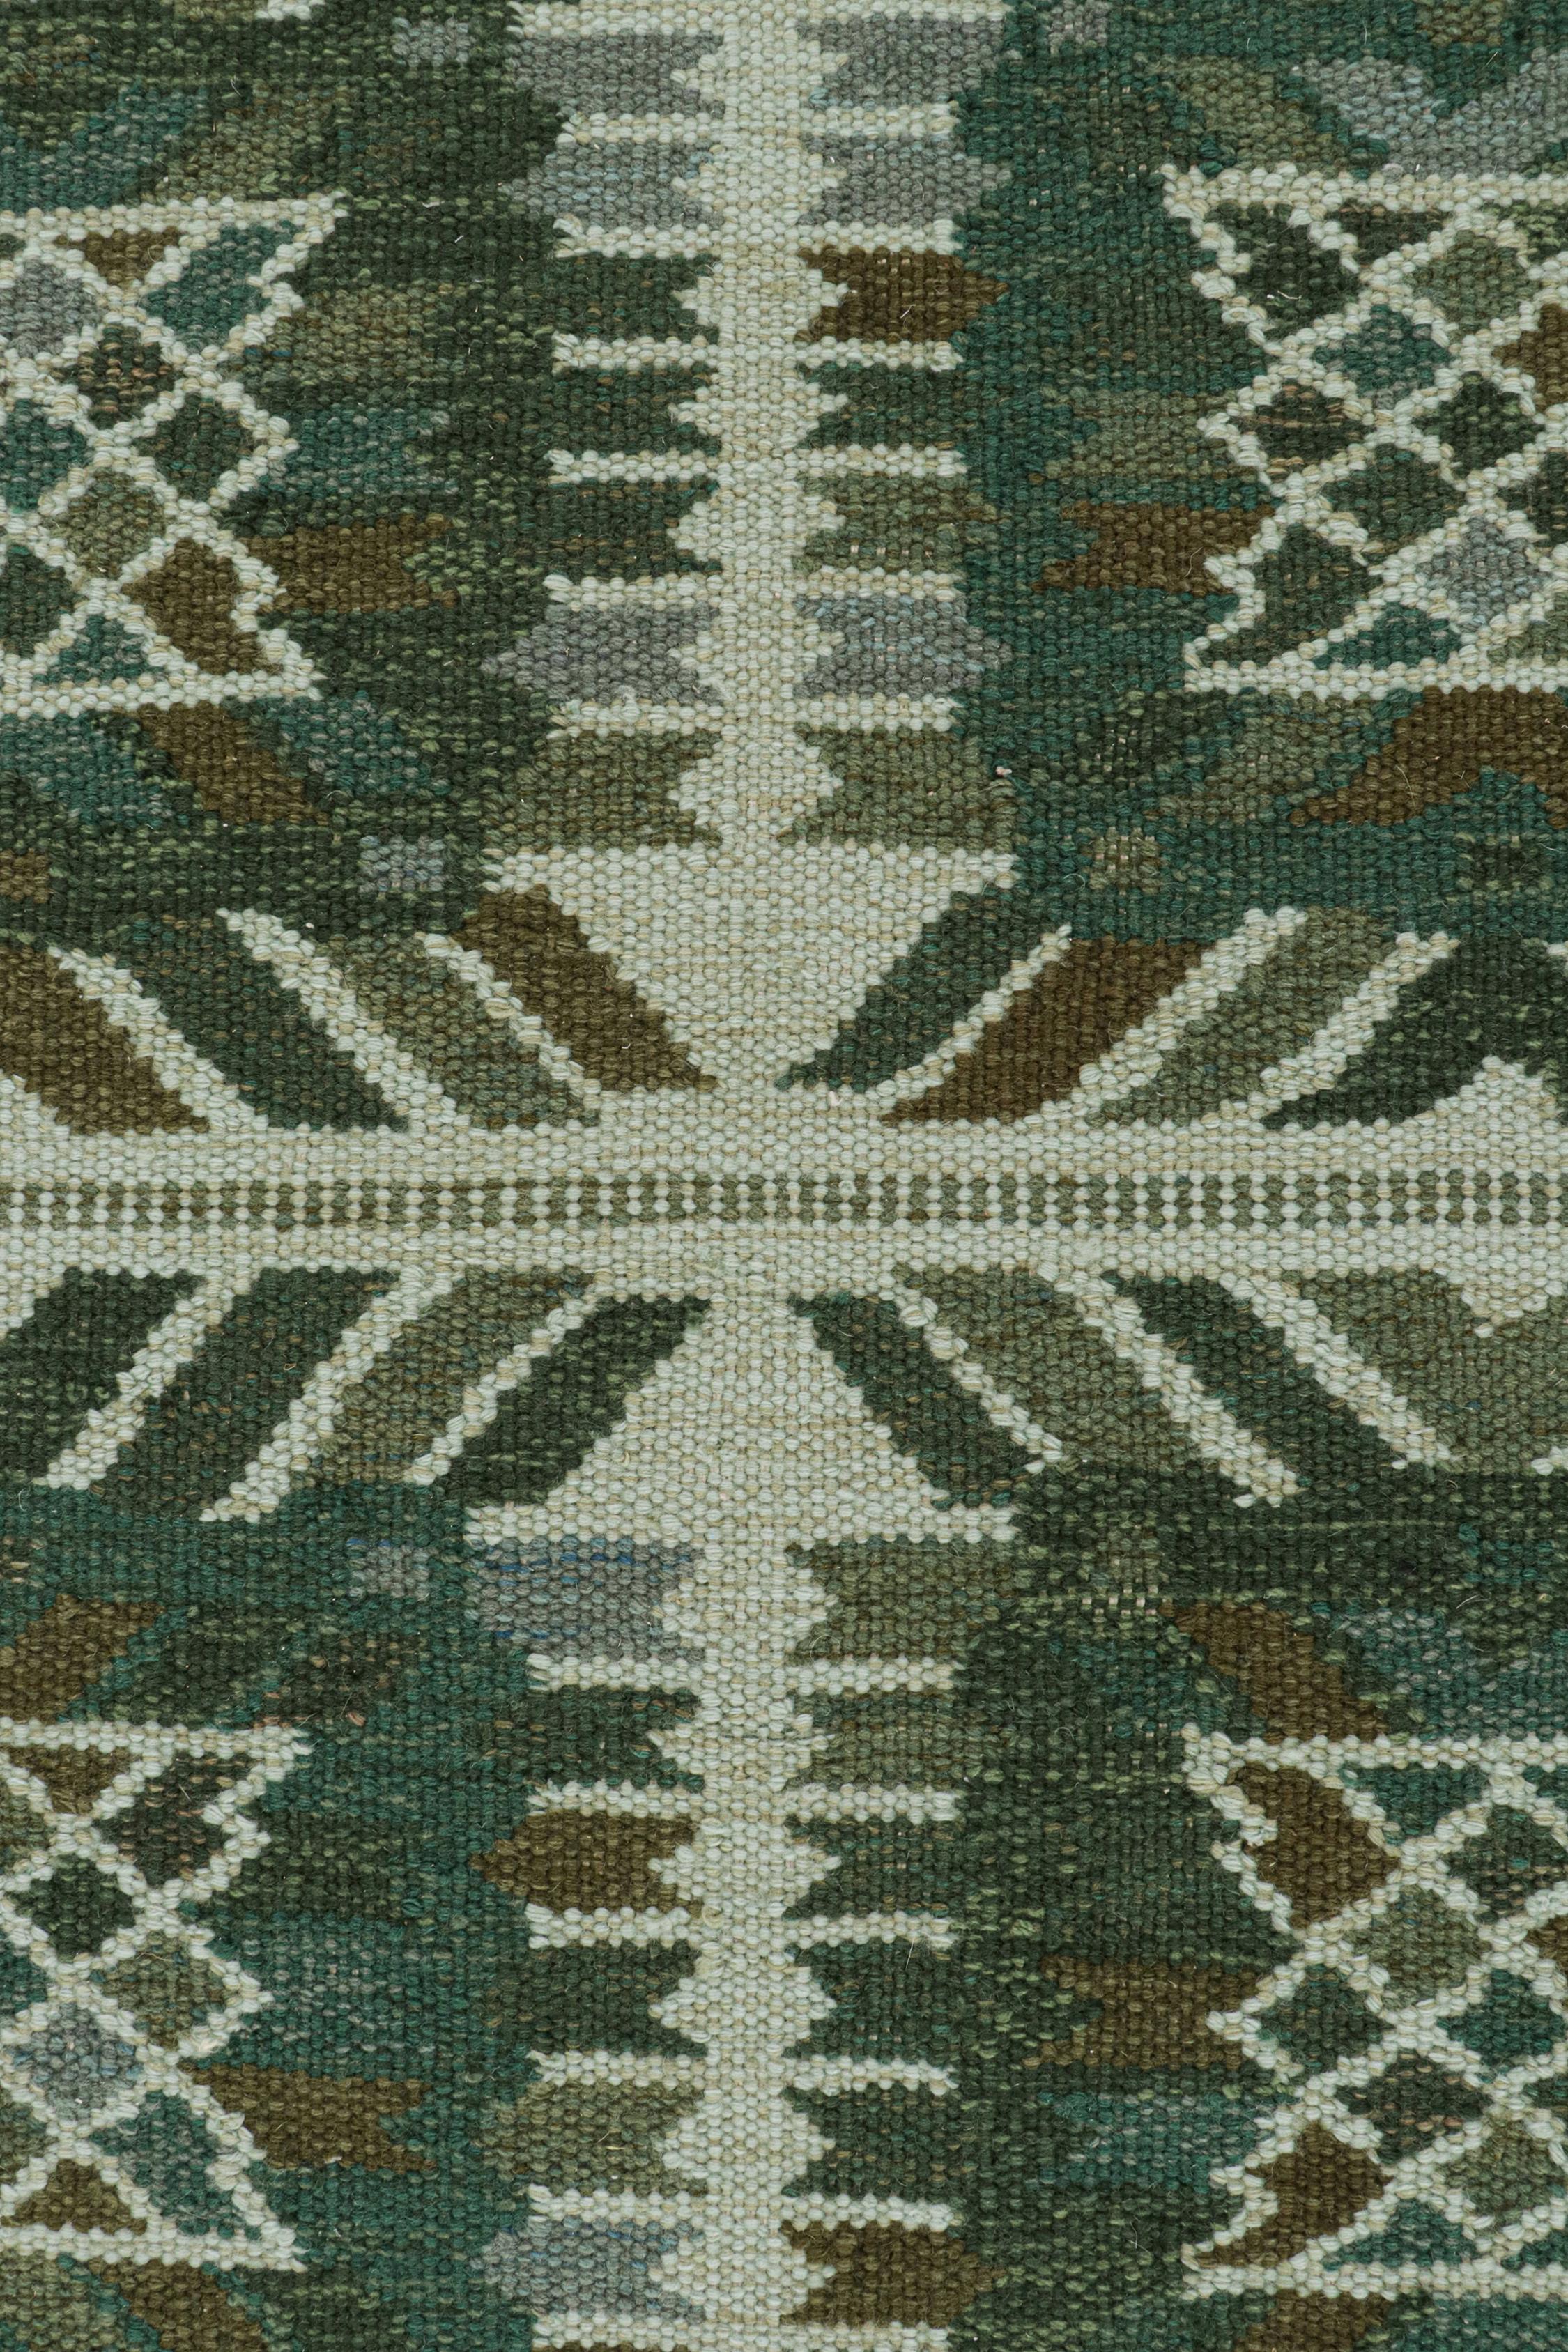 Rug & Kilim’s Scandinavian Style Kilim in Teal, Grey & Brown Geometric Patterns In New Condition For Sale In Long Island City, NY